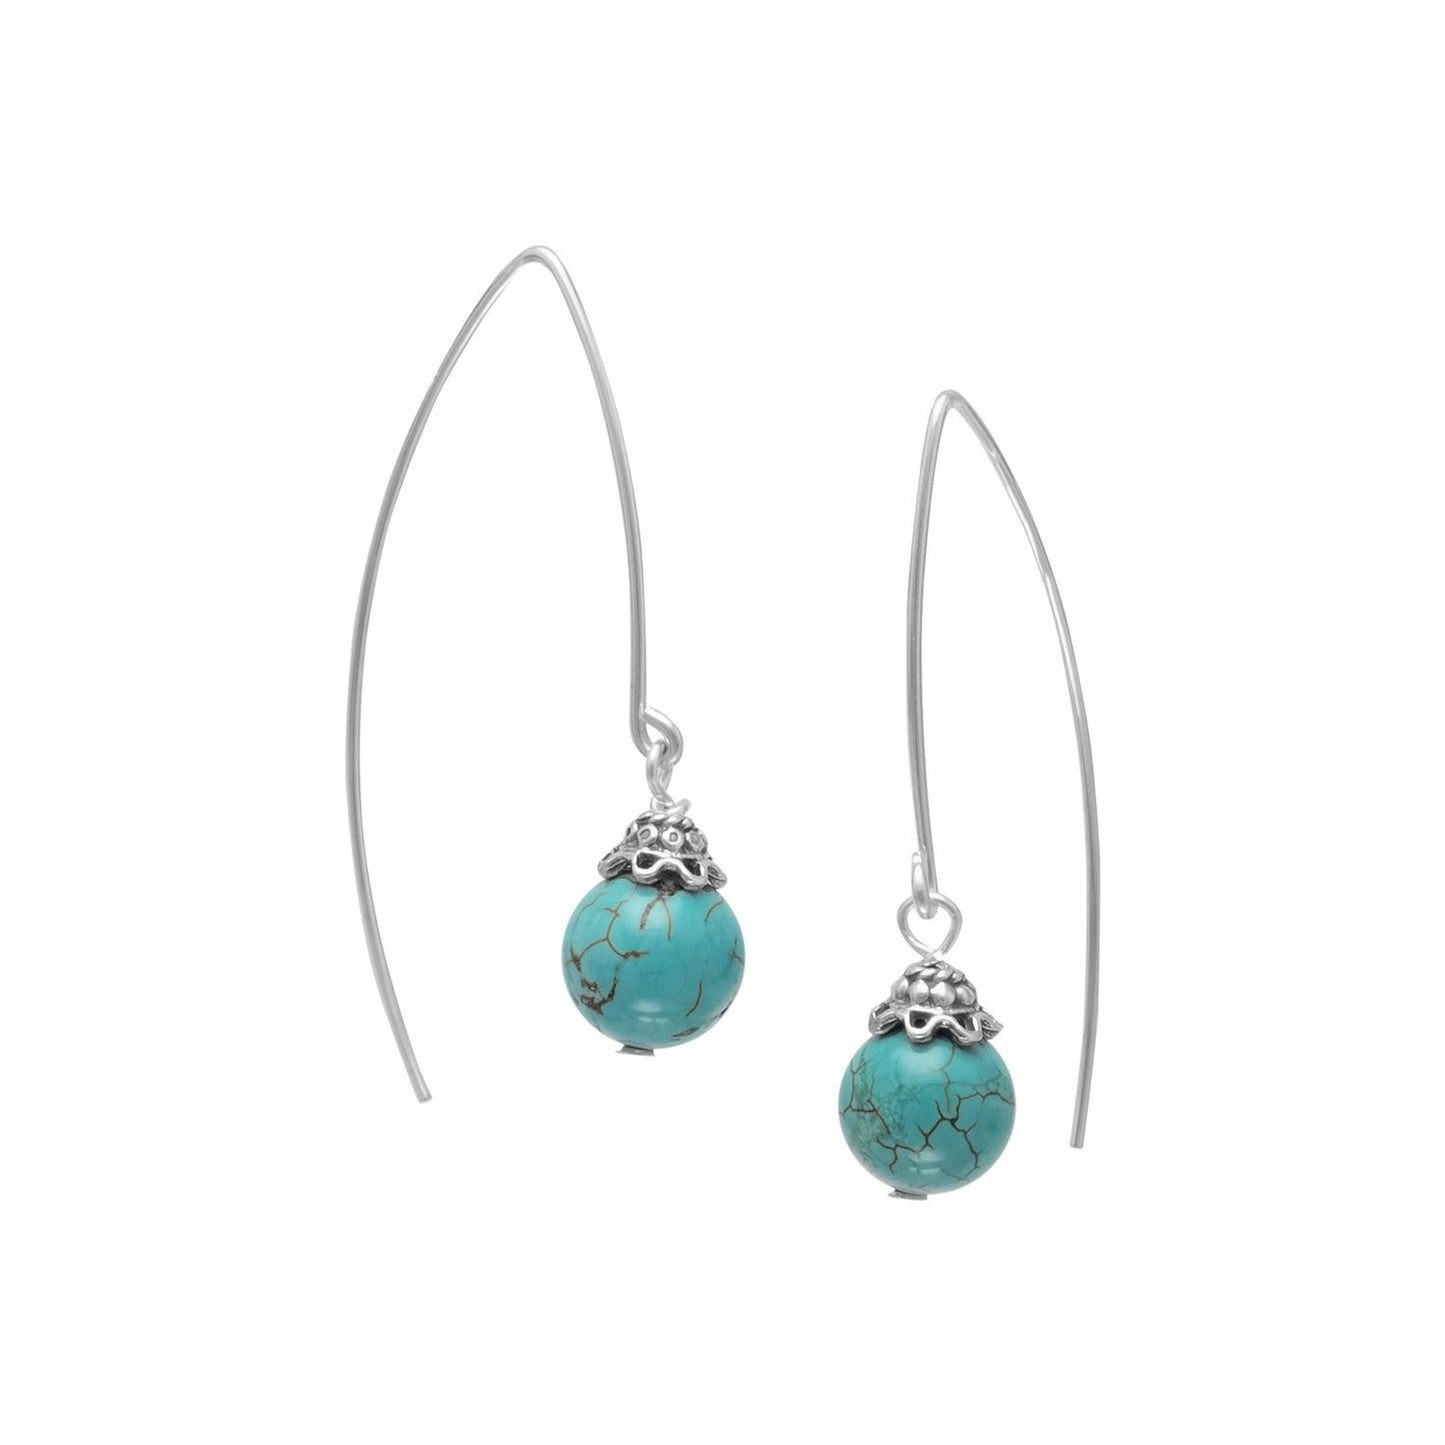 8mm Reconstituted Turquoise Bead Long Wire Earrings